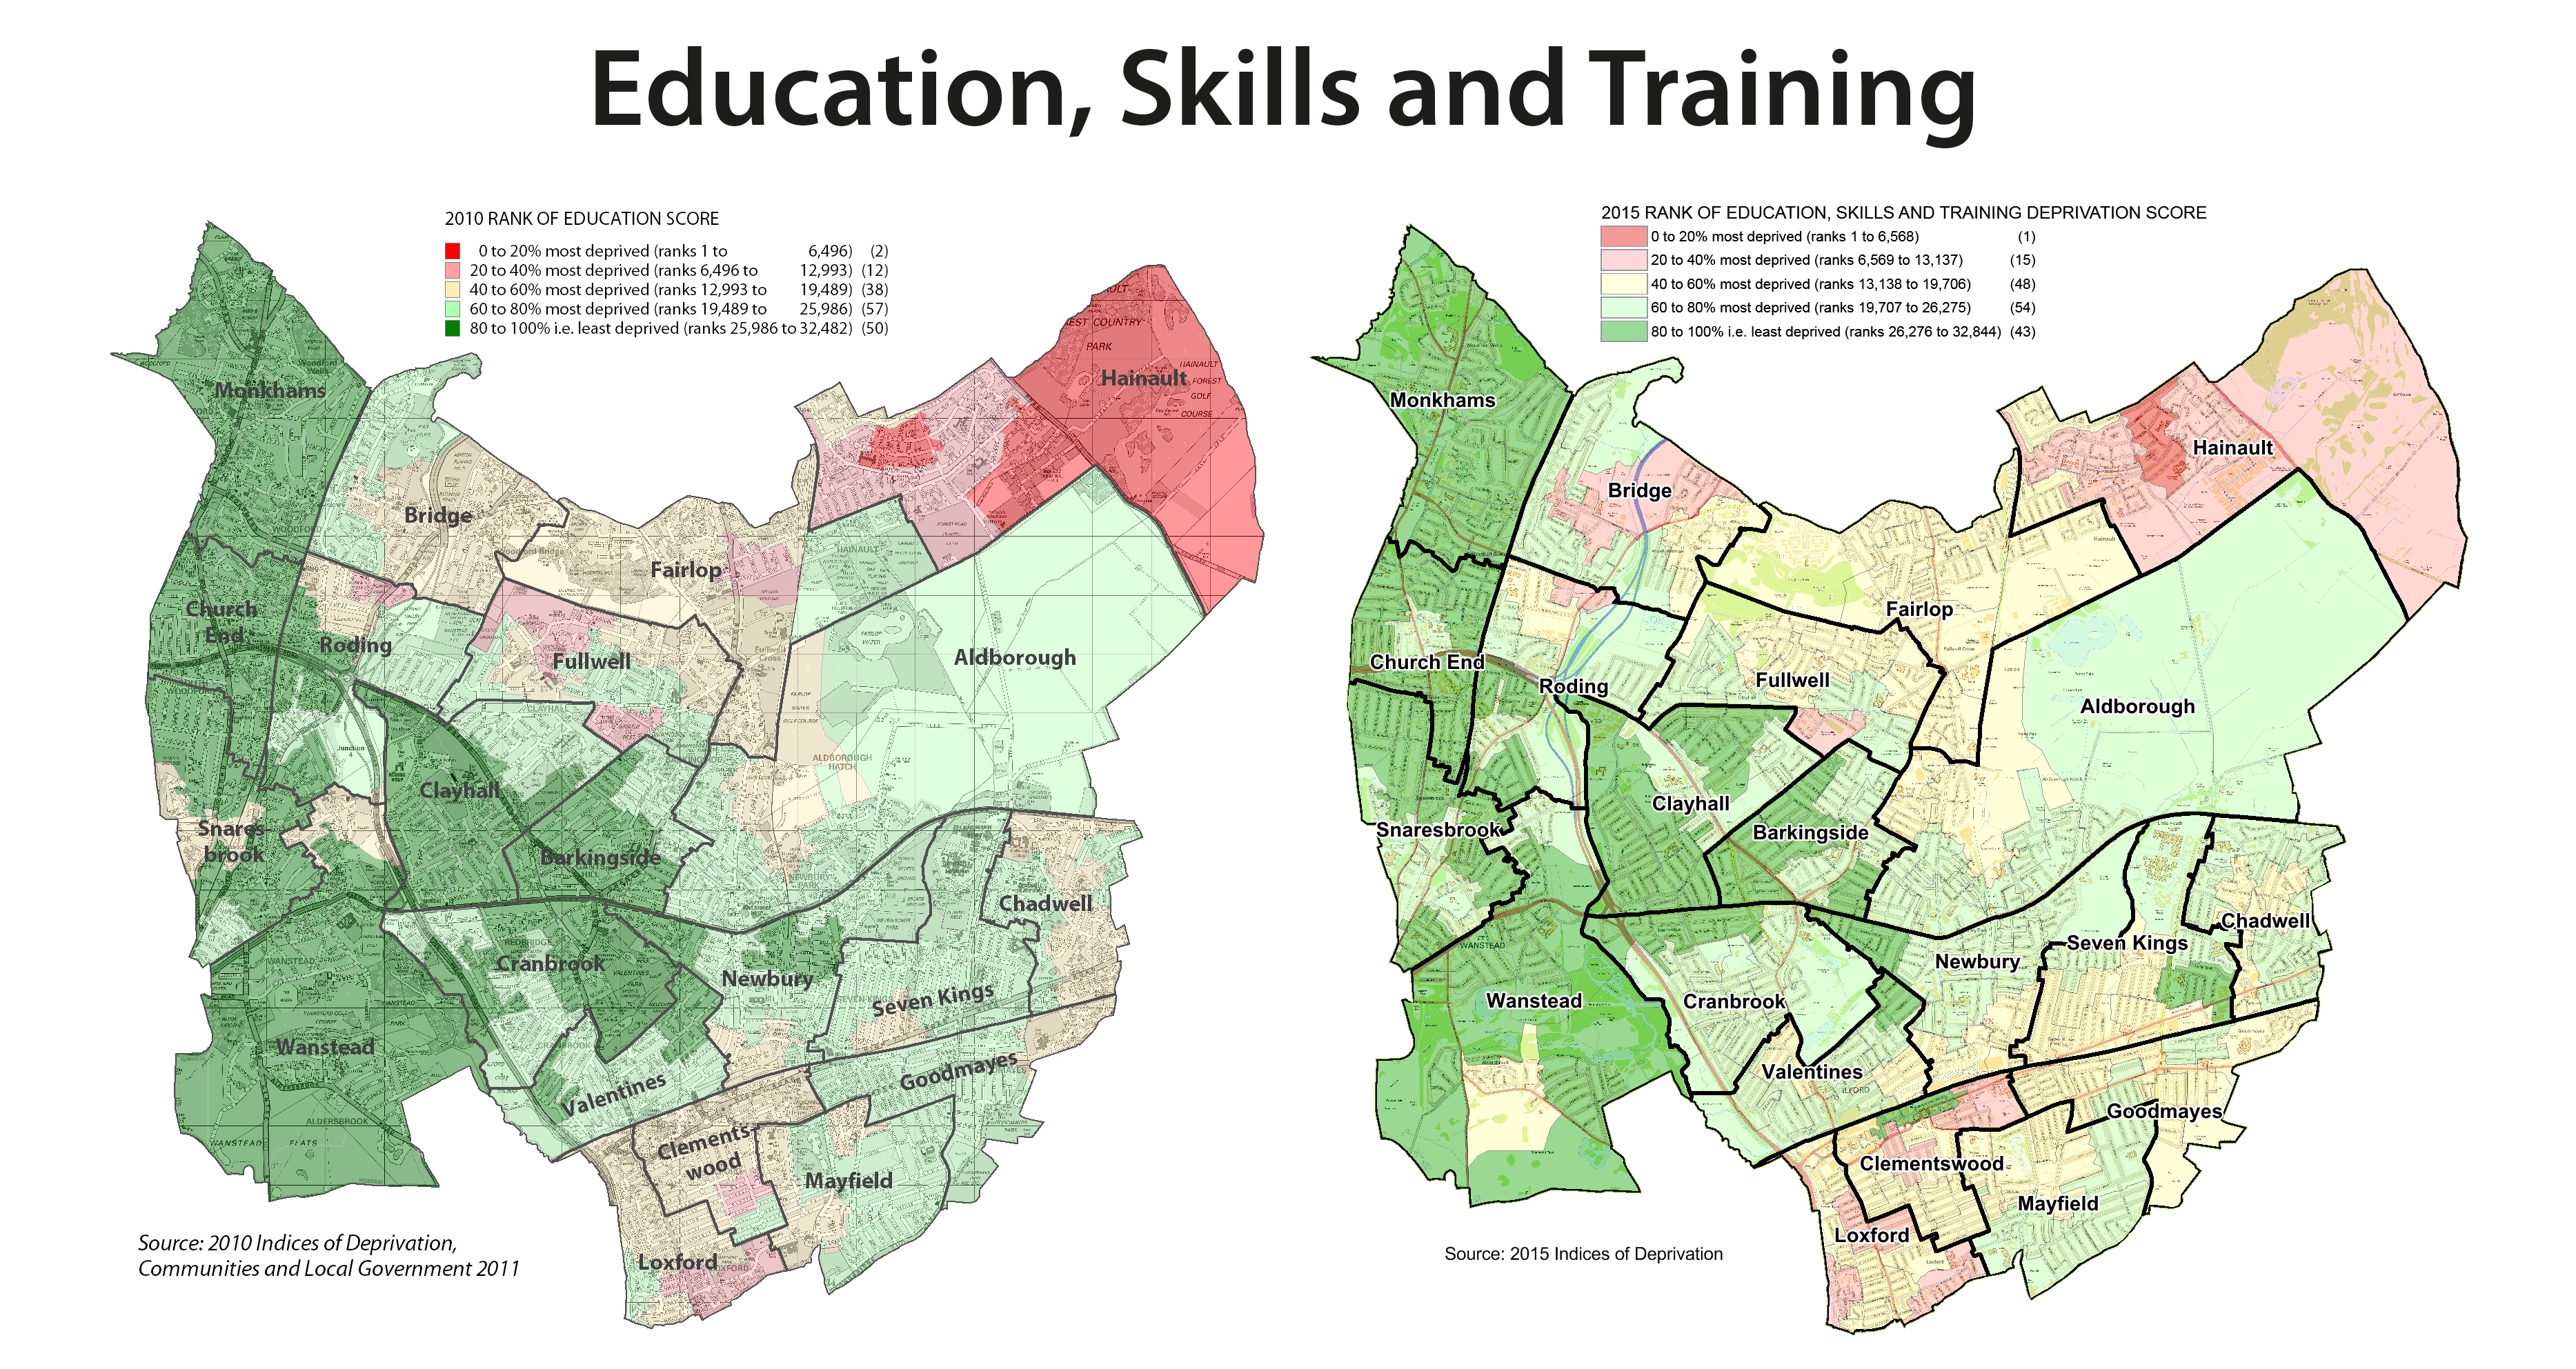 education, skills and training deprivation map